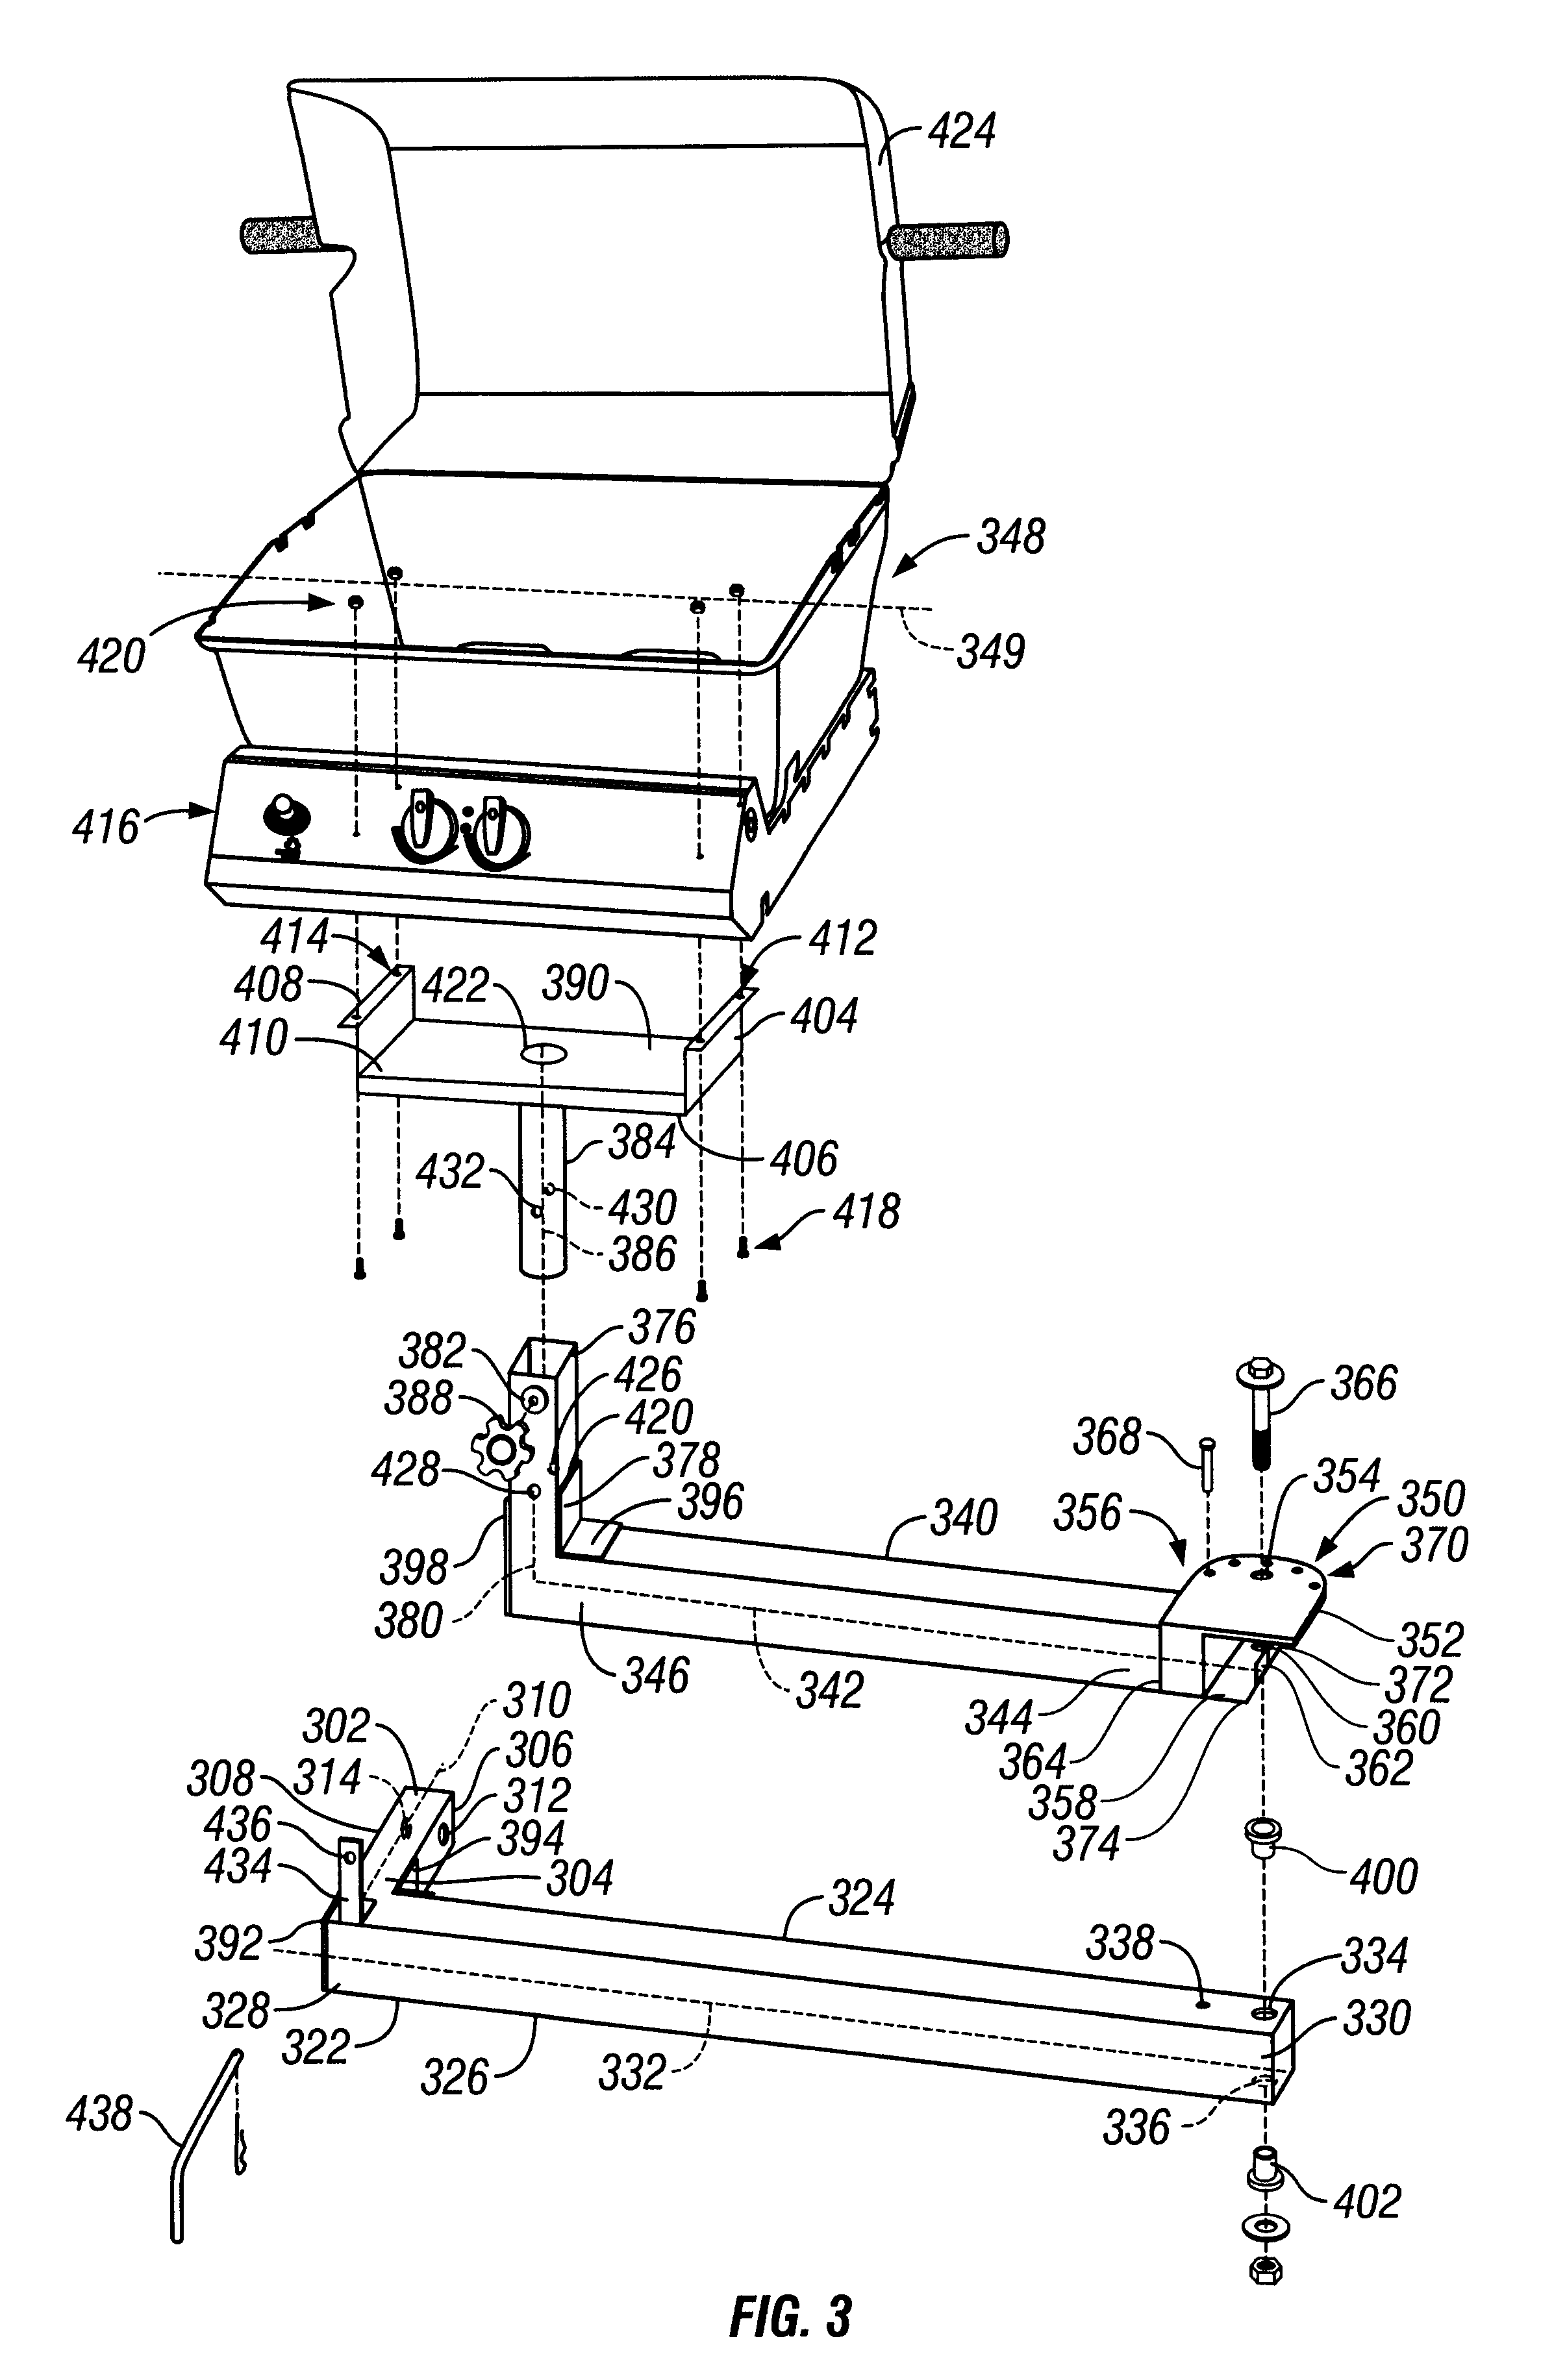 Swingable apparatus attachable to a vehicle for transporting a cooking device and permitting access to the vehicle